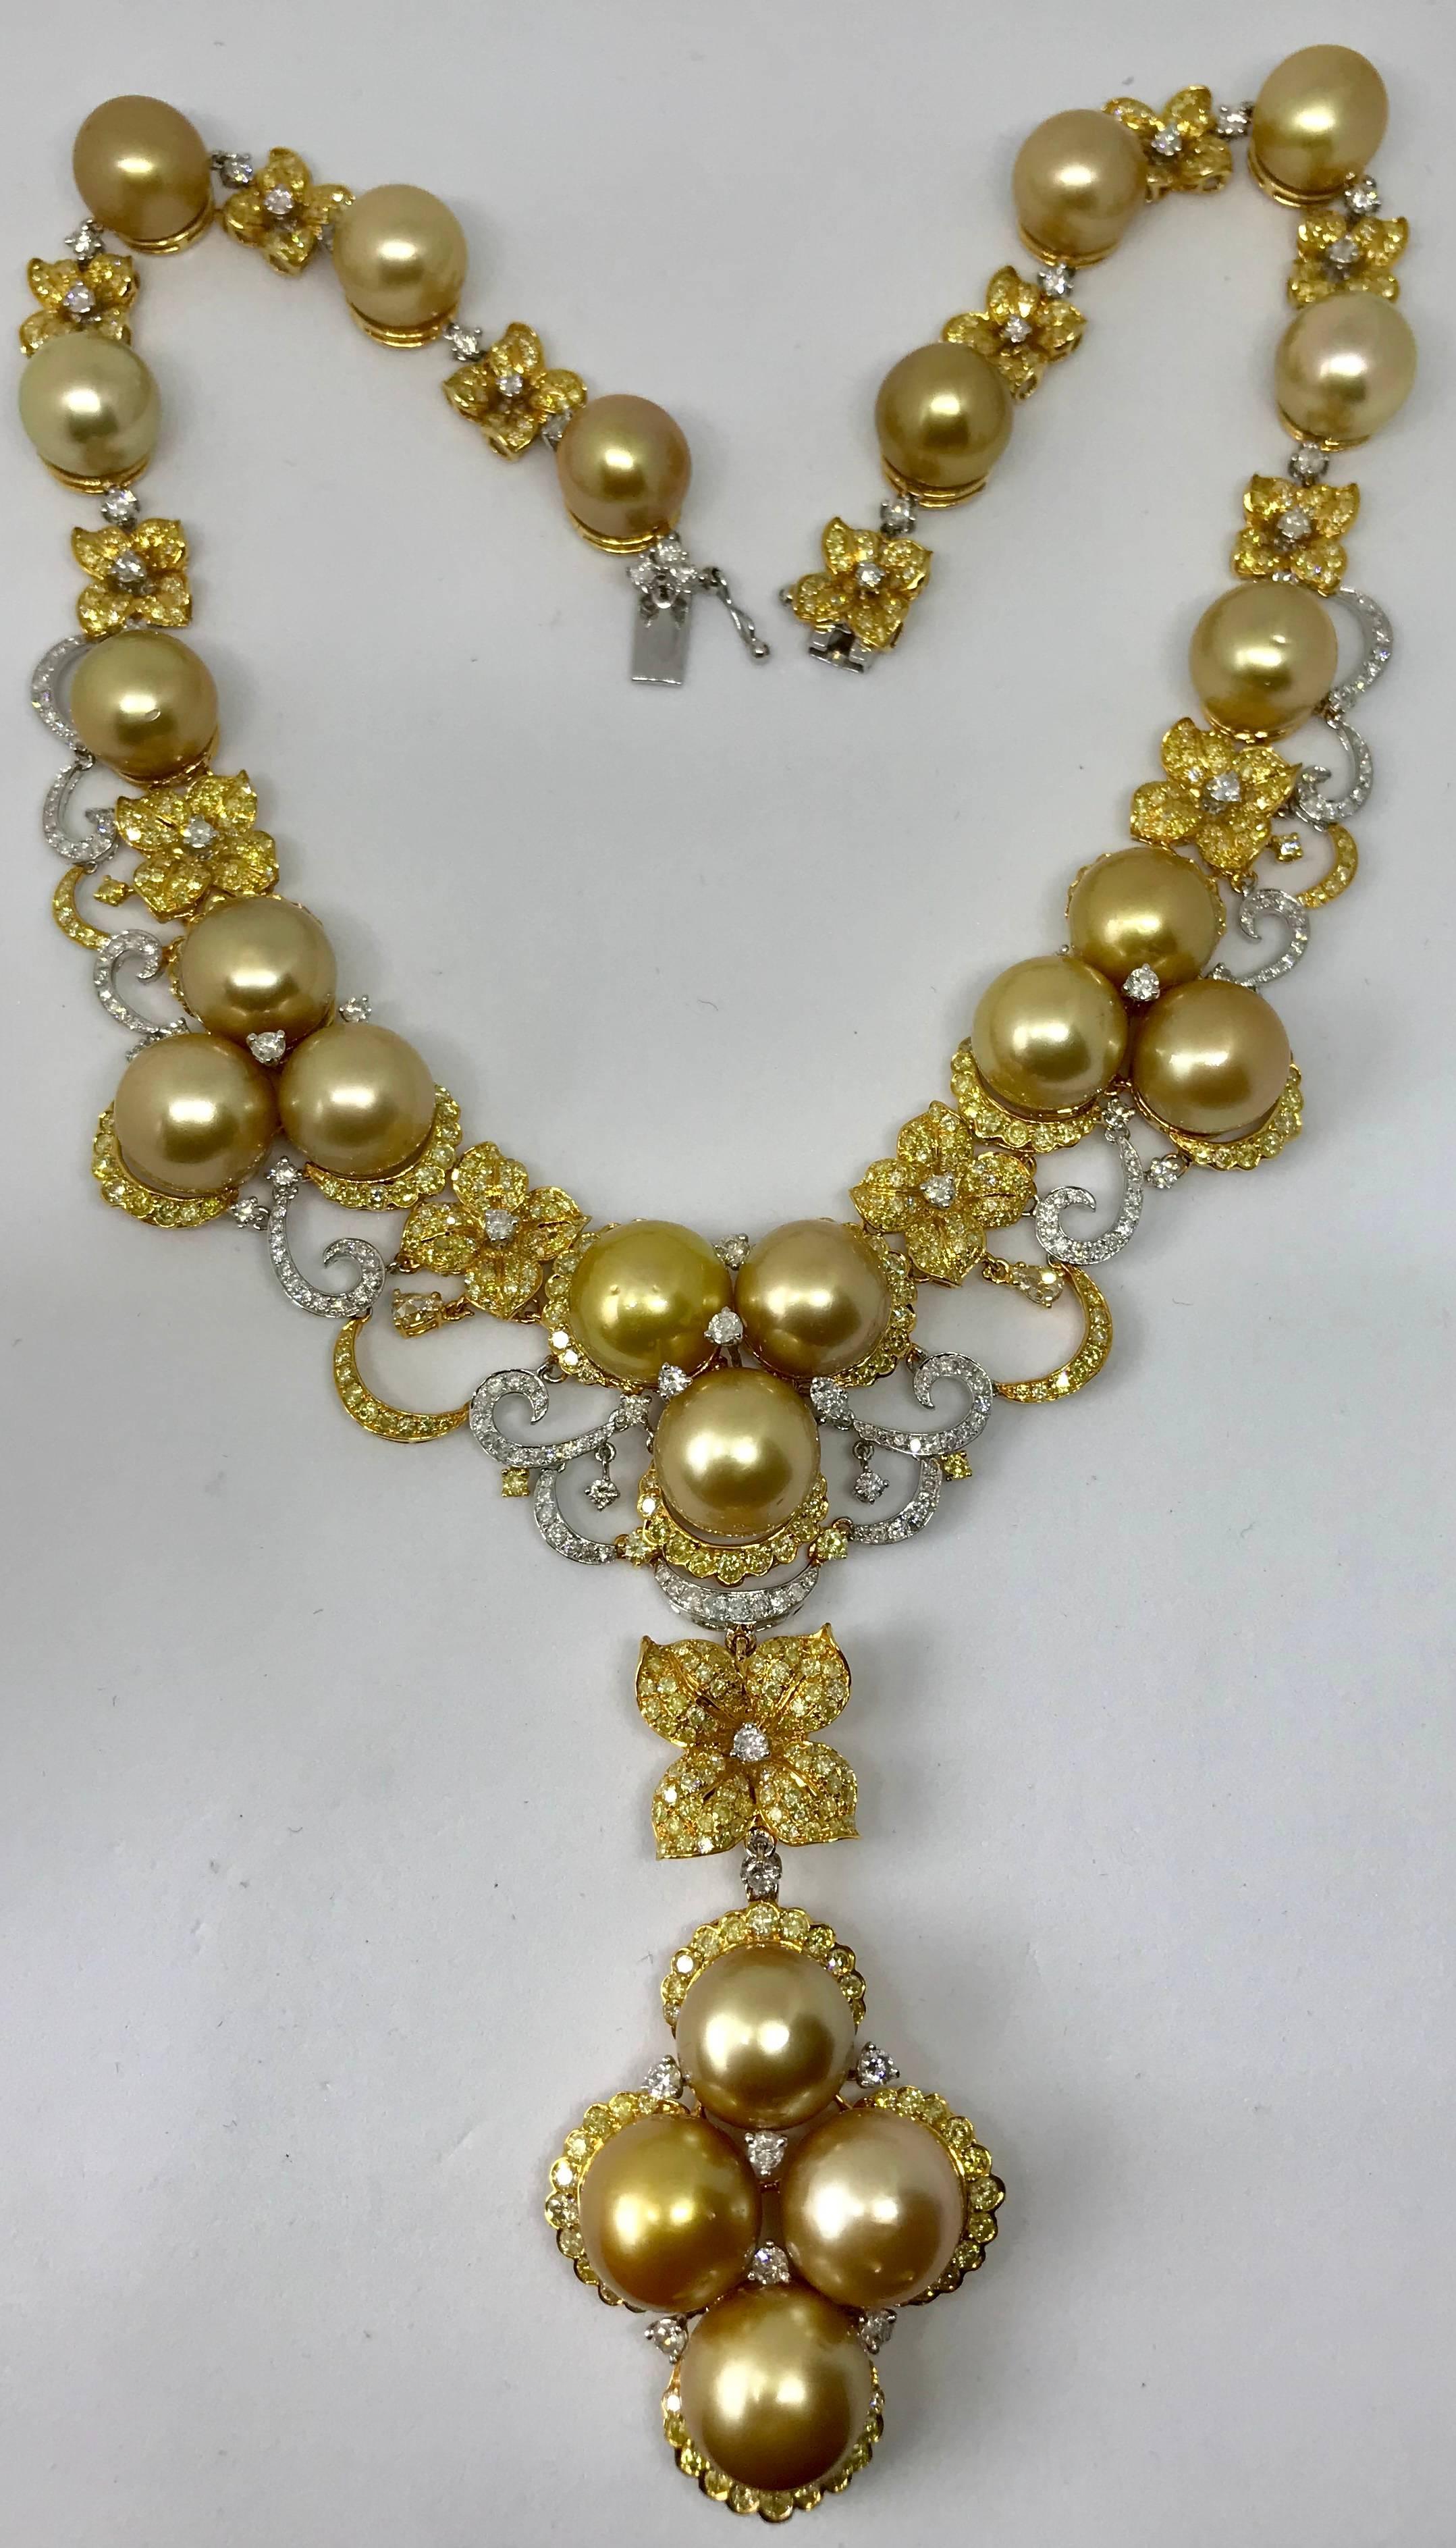 Golden South Sea Pearl Necklace with Diamonds and 18kt Gold 64.26 grams For Sale 1